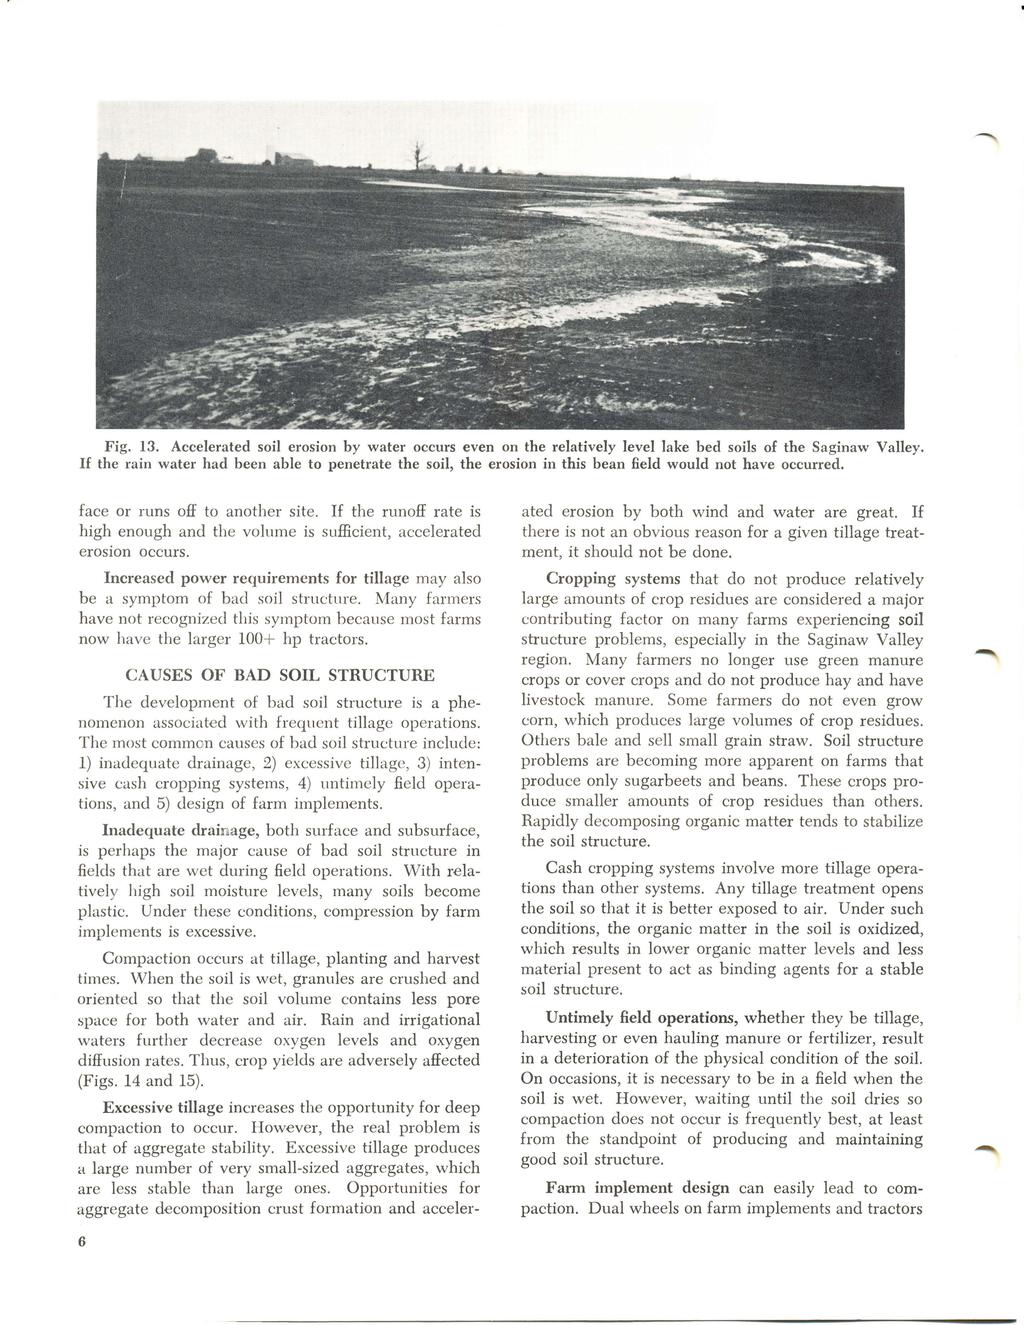 Fig. 13. Accelerated soil erosion by water occurs even on the relatively level lake bed soils of the Saginaw Valley.